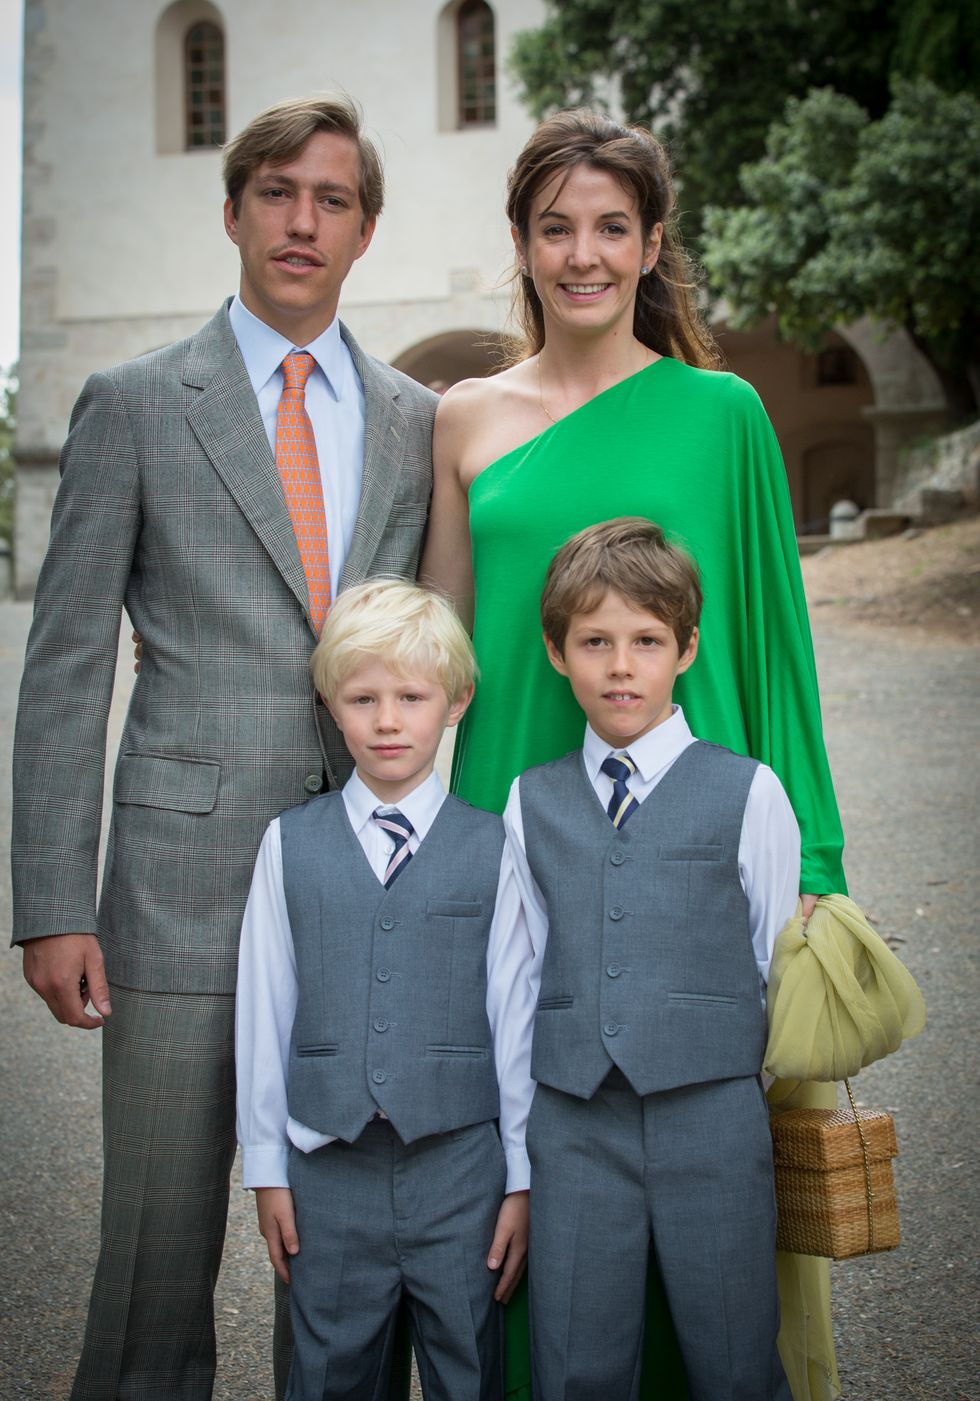 lorgues, france   july 12  prince louis and princess tessy of luxembourg with their children pose after the christening ceremony of princess amalia at the saint ferreol chapel in lorgues on july 12, 2014 in lorgues, france  photo by didier baverelgetty images